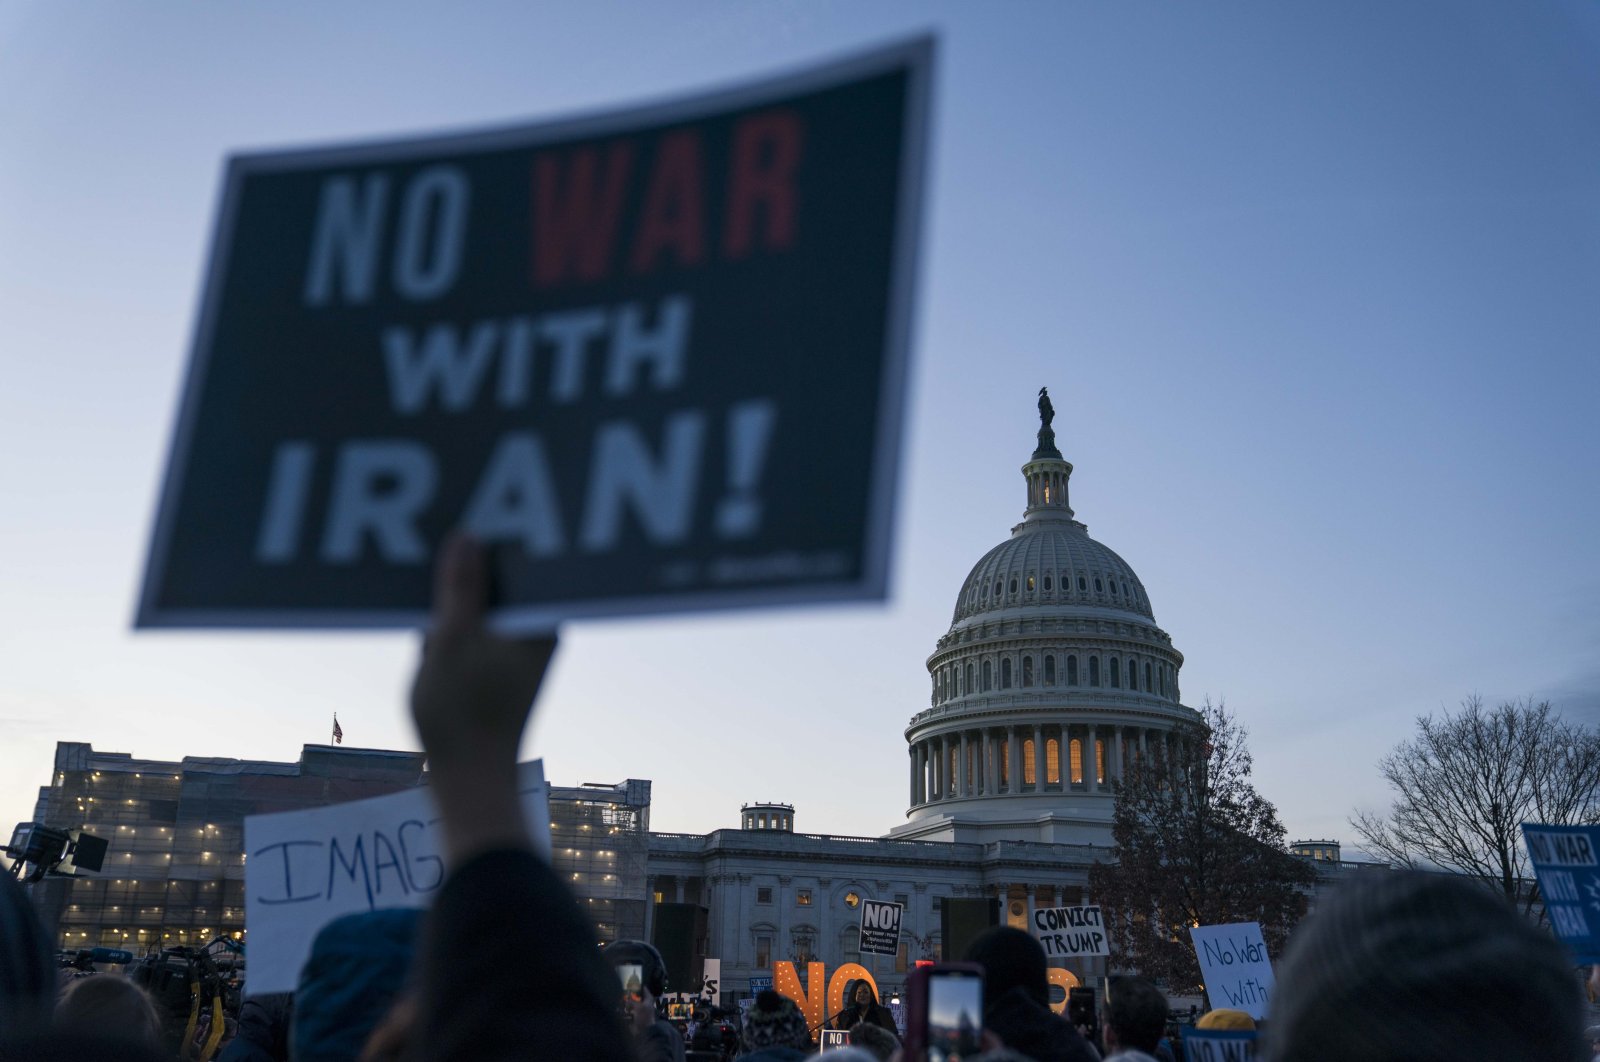 People demonstrate against the U.S. entering a war with Iran, at the U.S. Capitol, Washington, D.C., Jan. 9, 2020. (Photo by Getty Images)